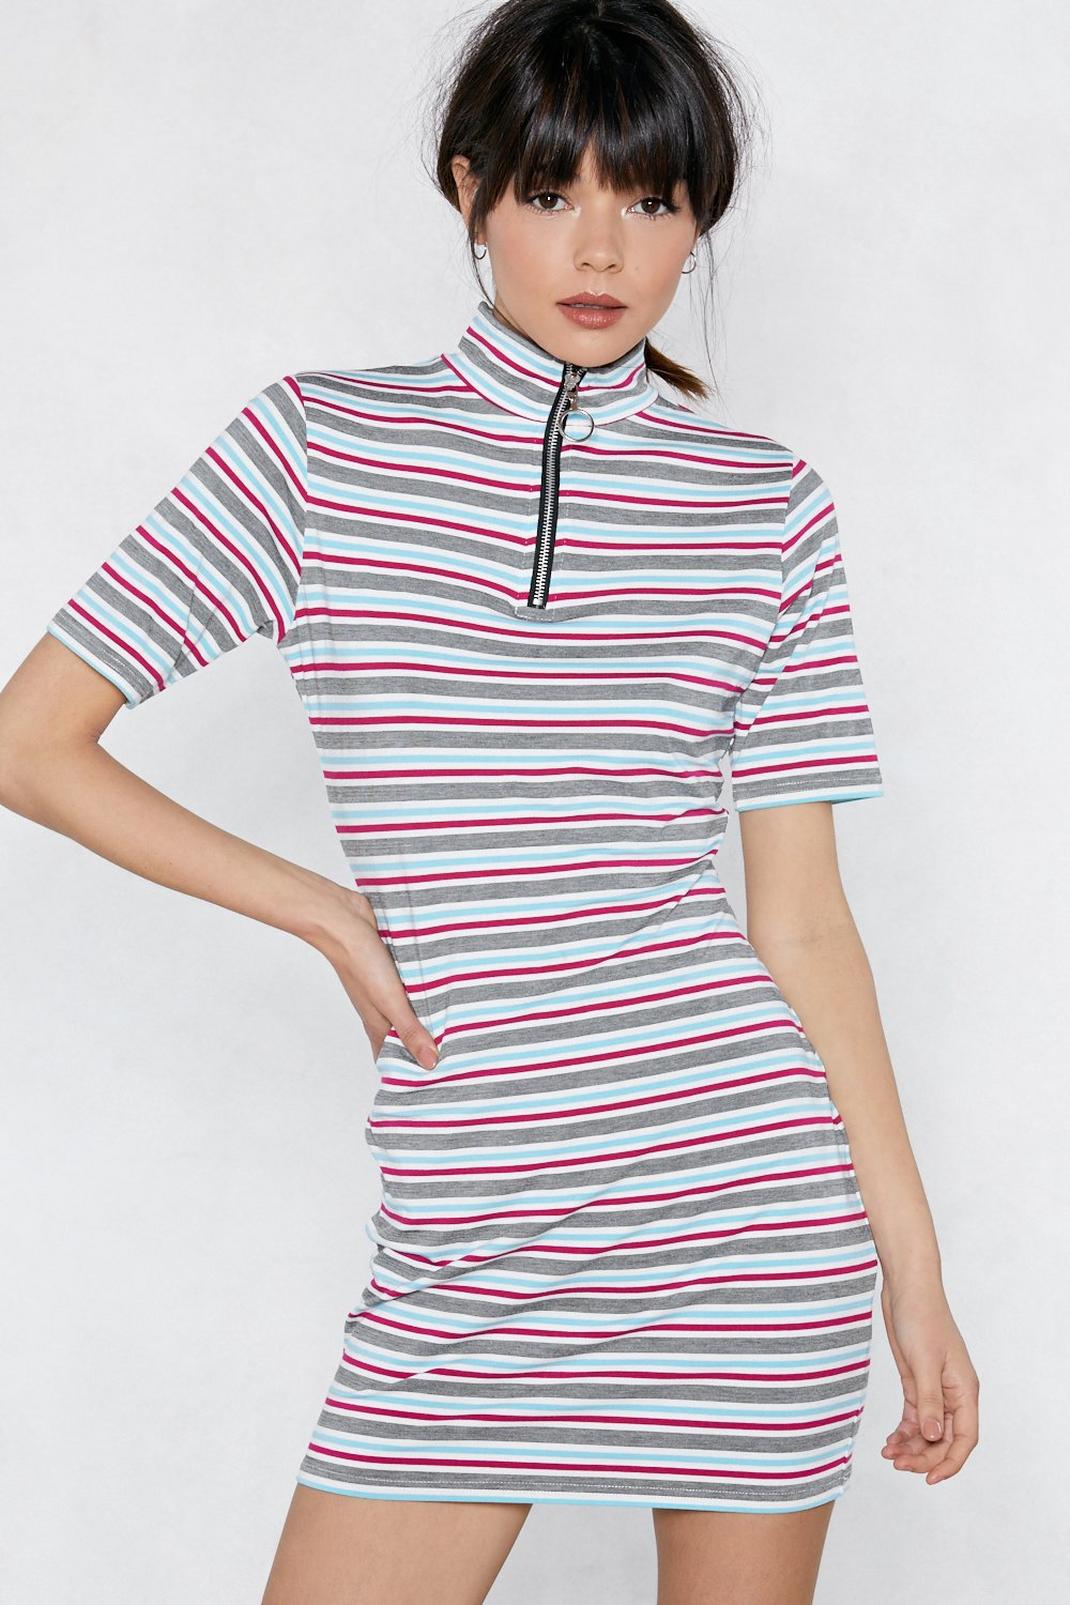 O Baby Baby Striped Dress, White image number 1